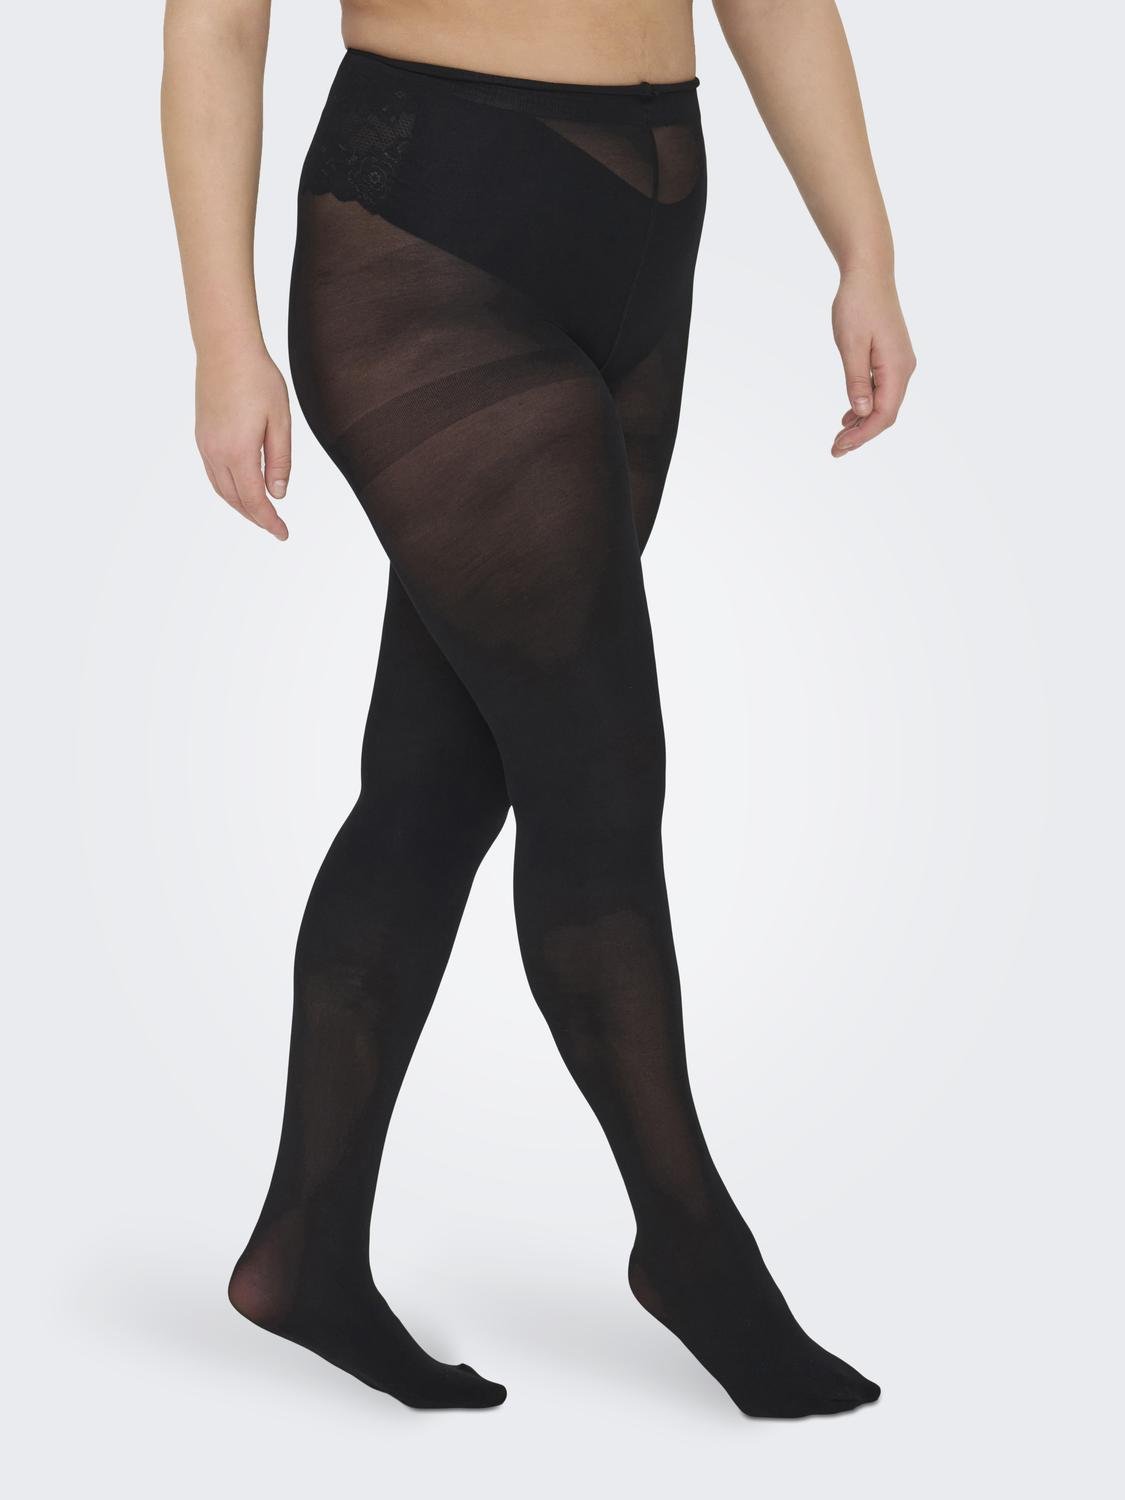 https://images.only.com/15219823/3514359/003/only-curvybasicpantyhose-black.jpg?v=b7a6df24f58df464ae93f3620c11651b&format=webp&width=1280&quality=90&key=25-0-3